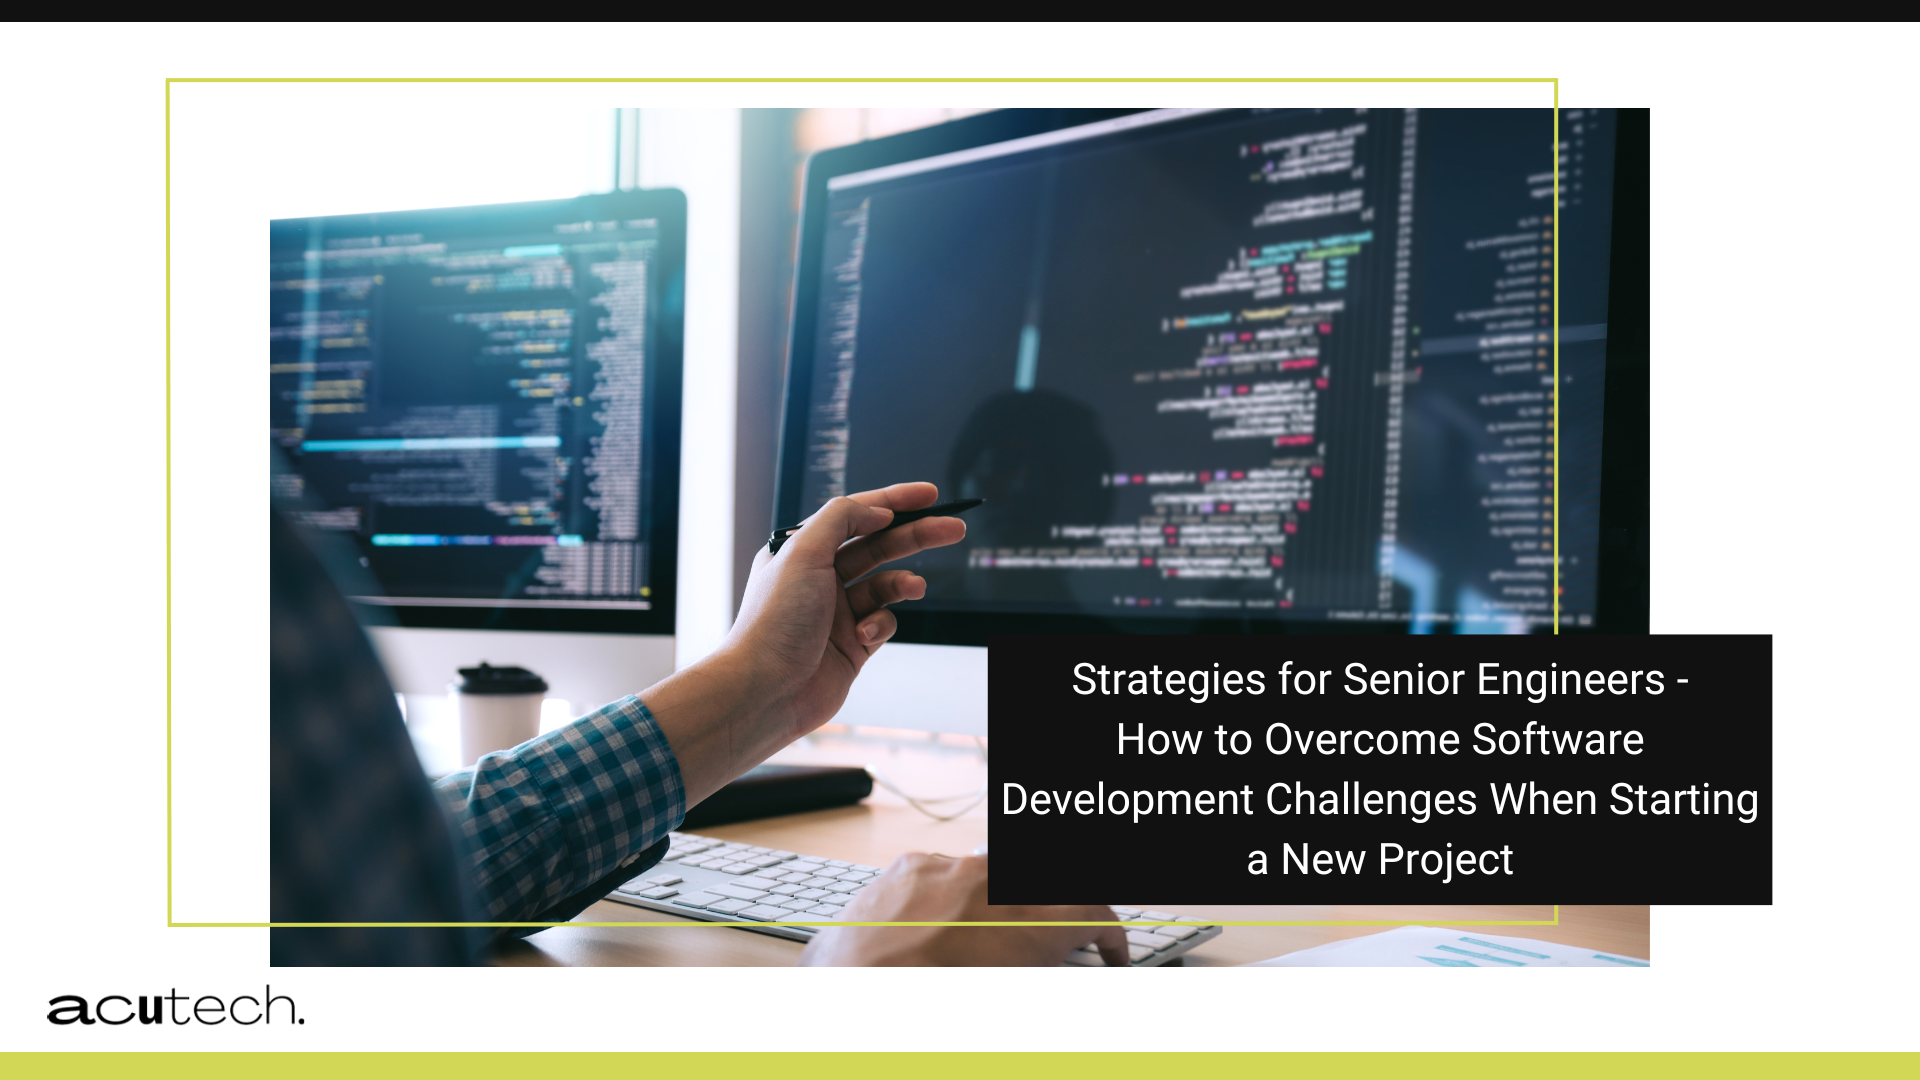 How to Overcome Software Development Challenges